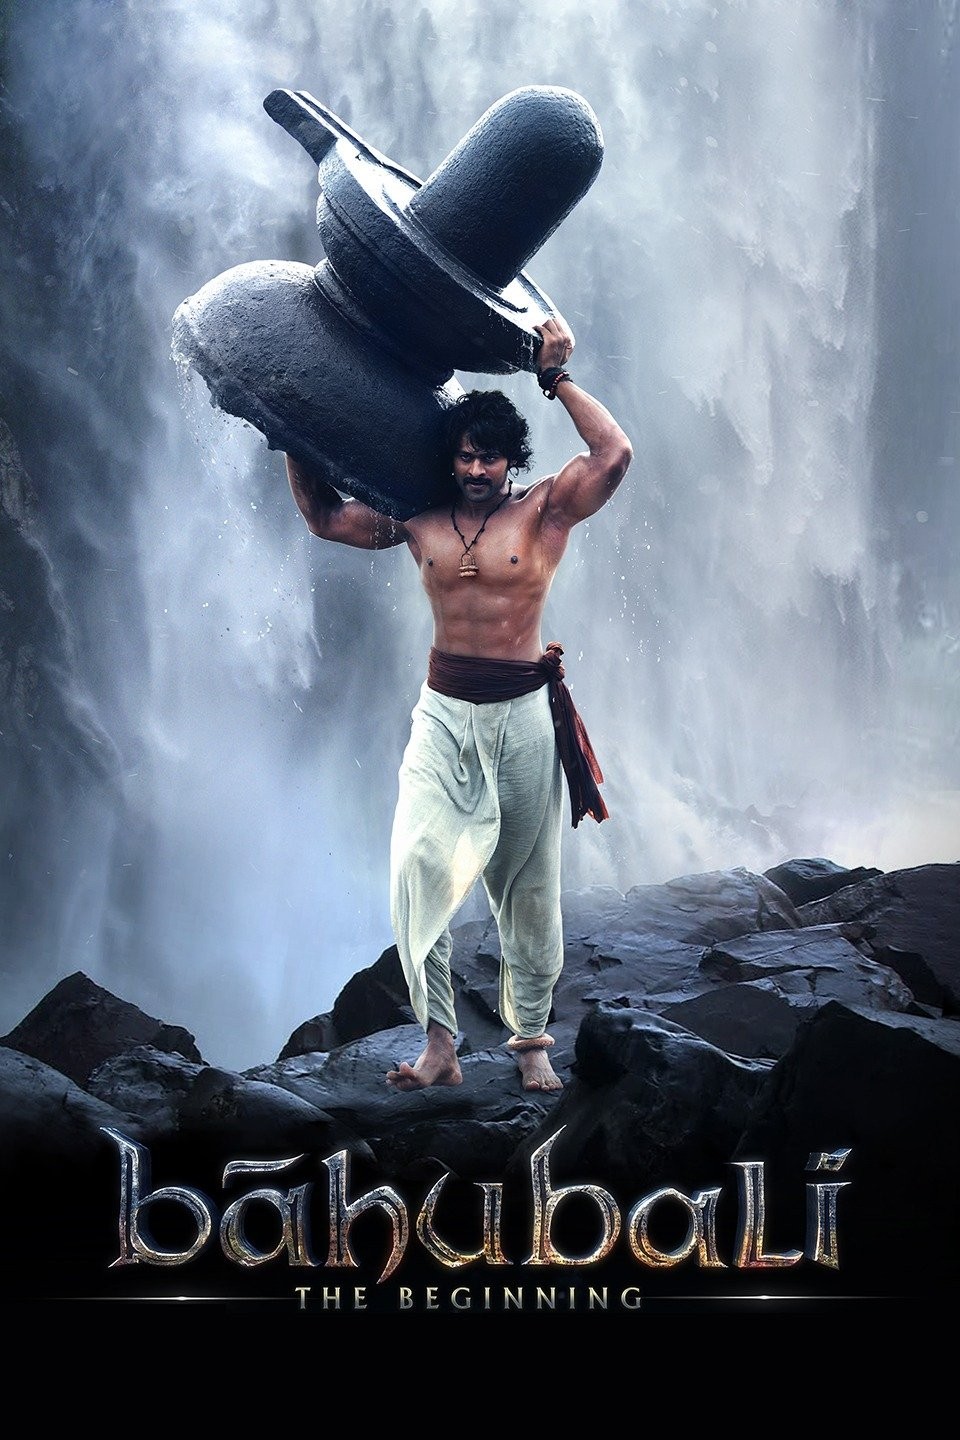 ‘baahubali: the beginning’ review: a giddy spectacle, if somewhat uneven